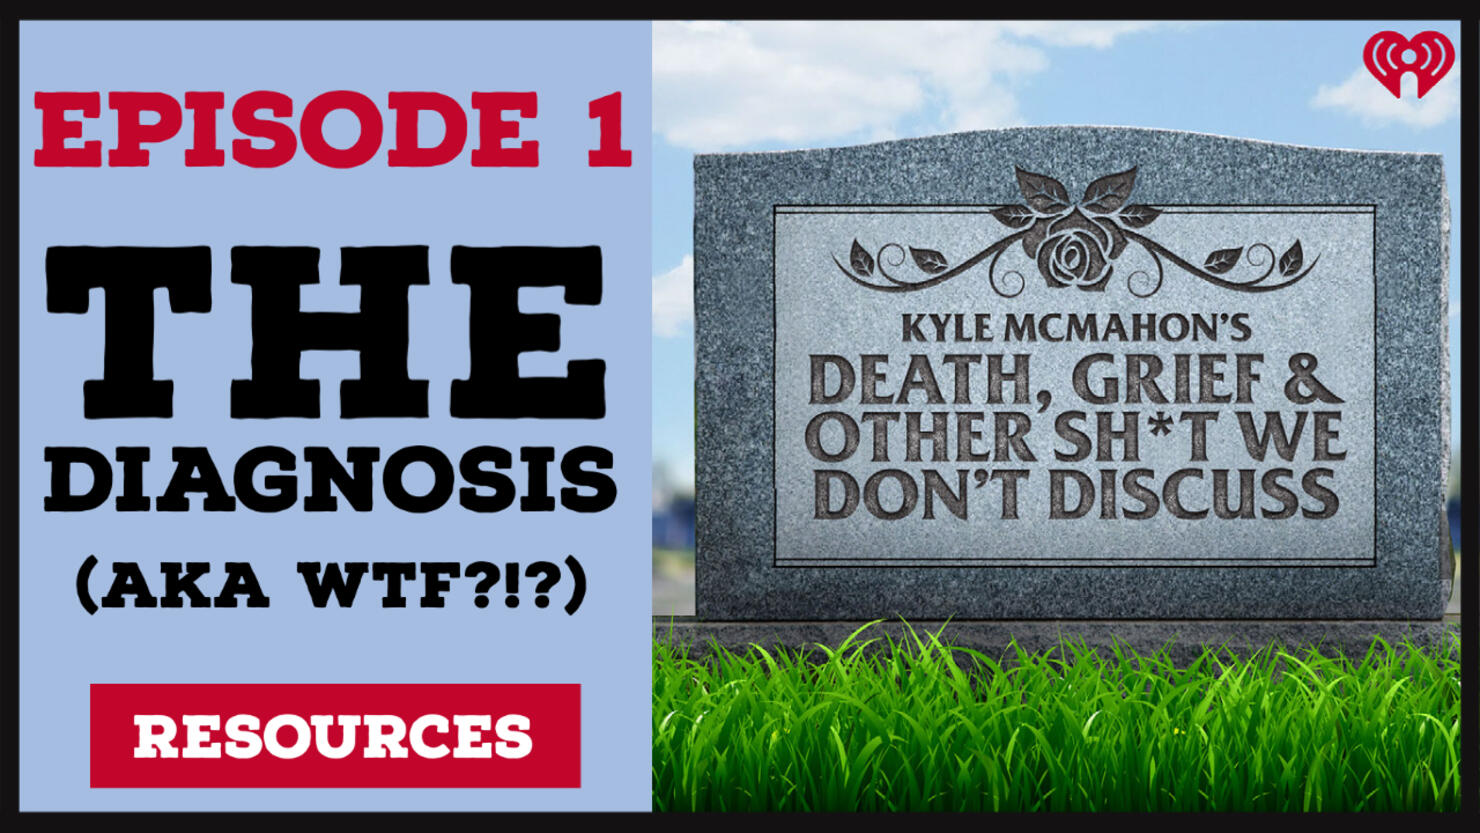 Kyle McMahon's Death, Grief & Other Shit We Don't Discuss, Episode 1: The Diagnosis (aka WTF?!?): Resources